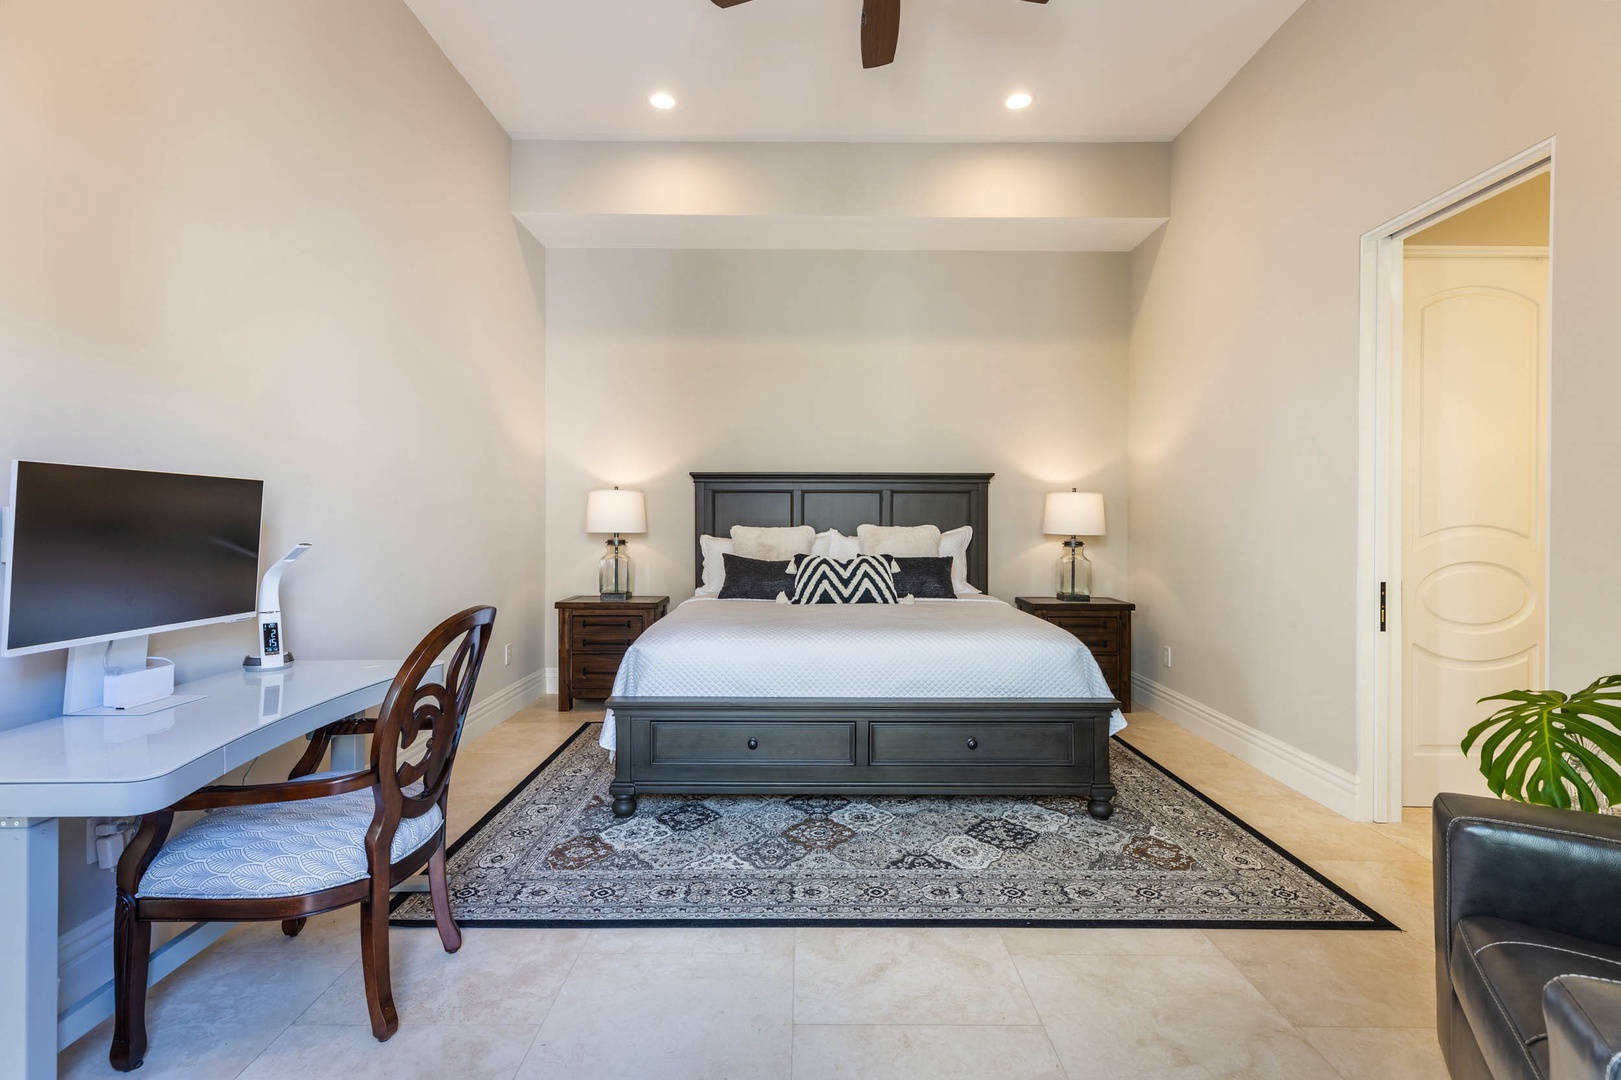 Honolulu Vacation Rentals, The Kahala Mansion - Guest bedroom with a king bed and a dedicated home office space.